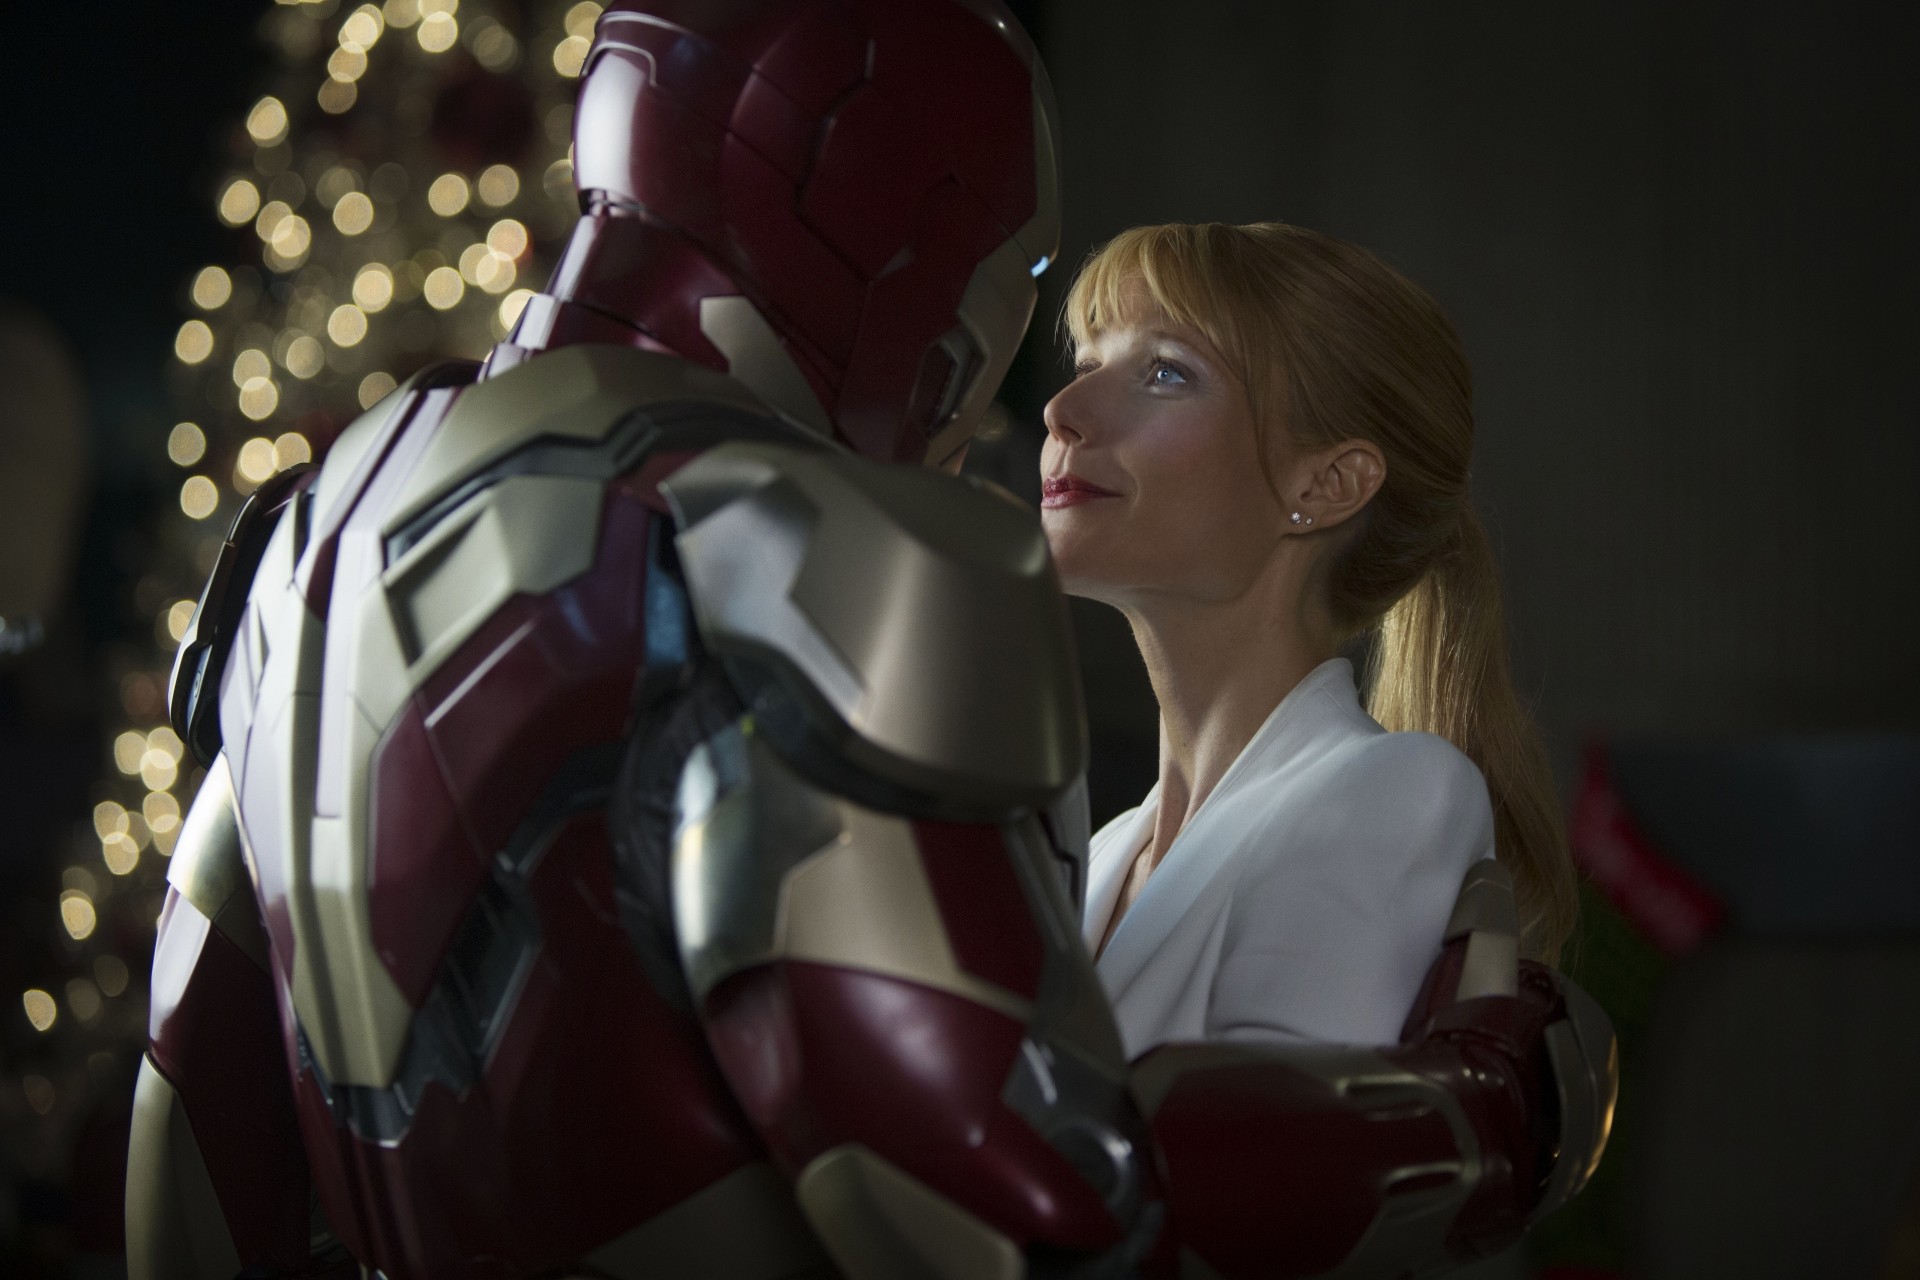 Iron Man 3 download the new for windows